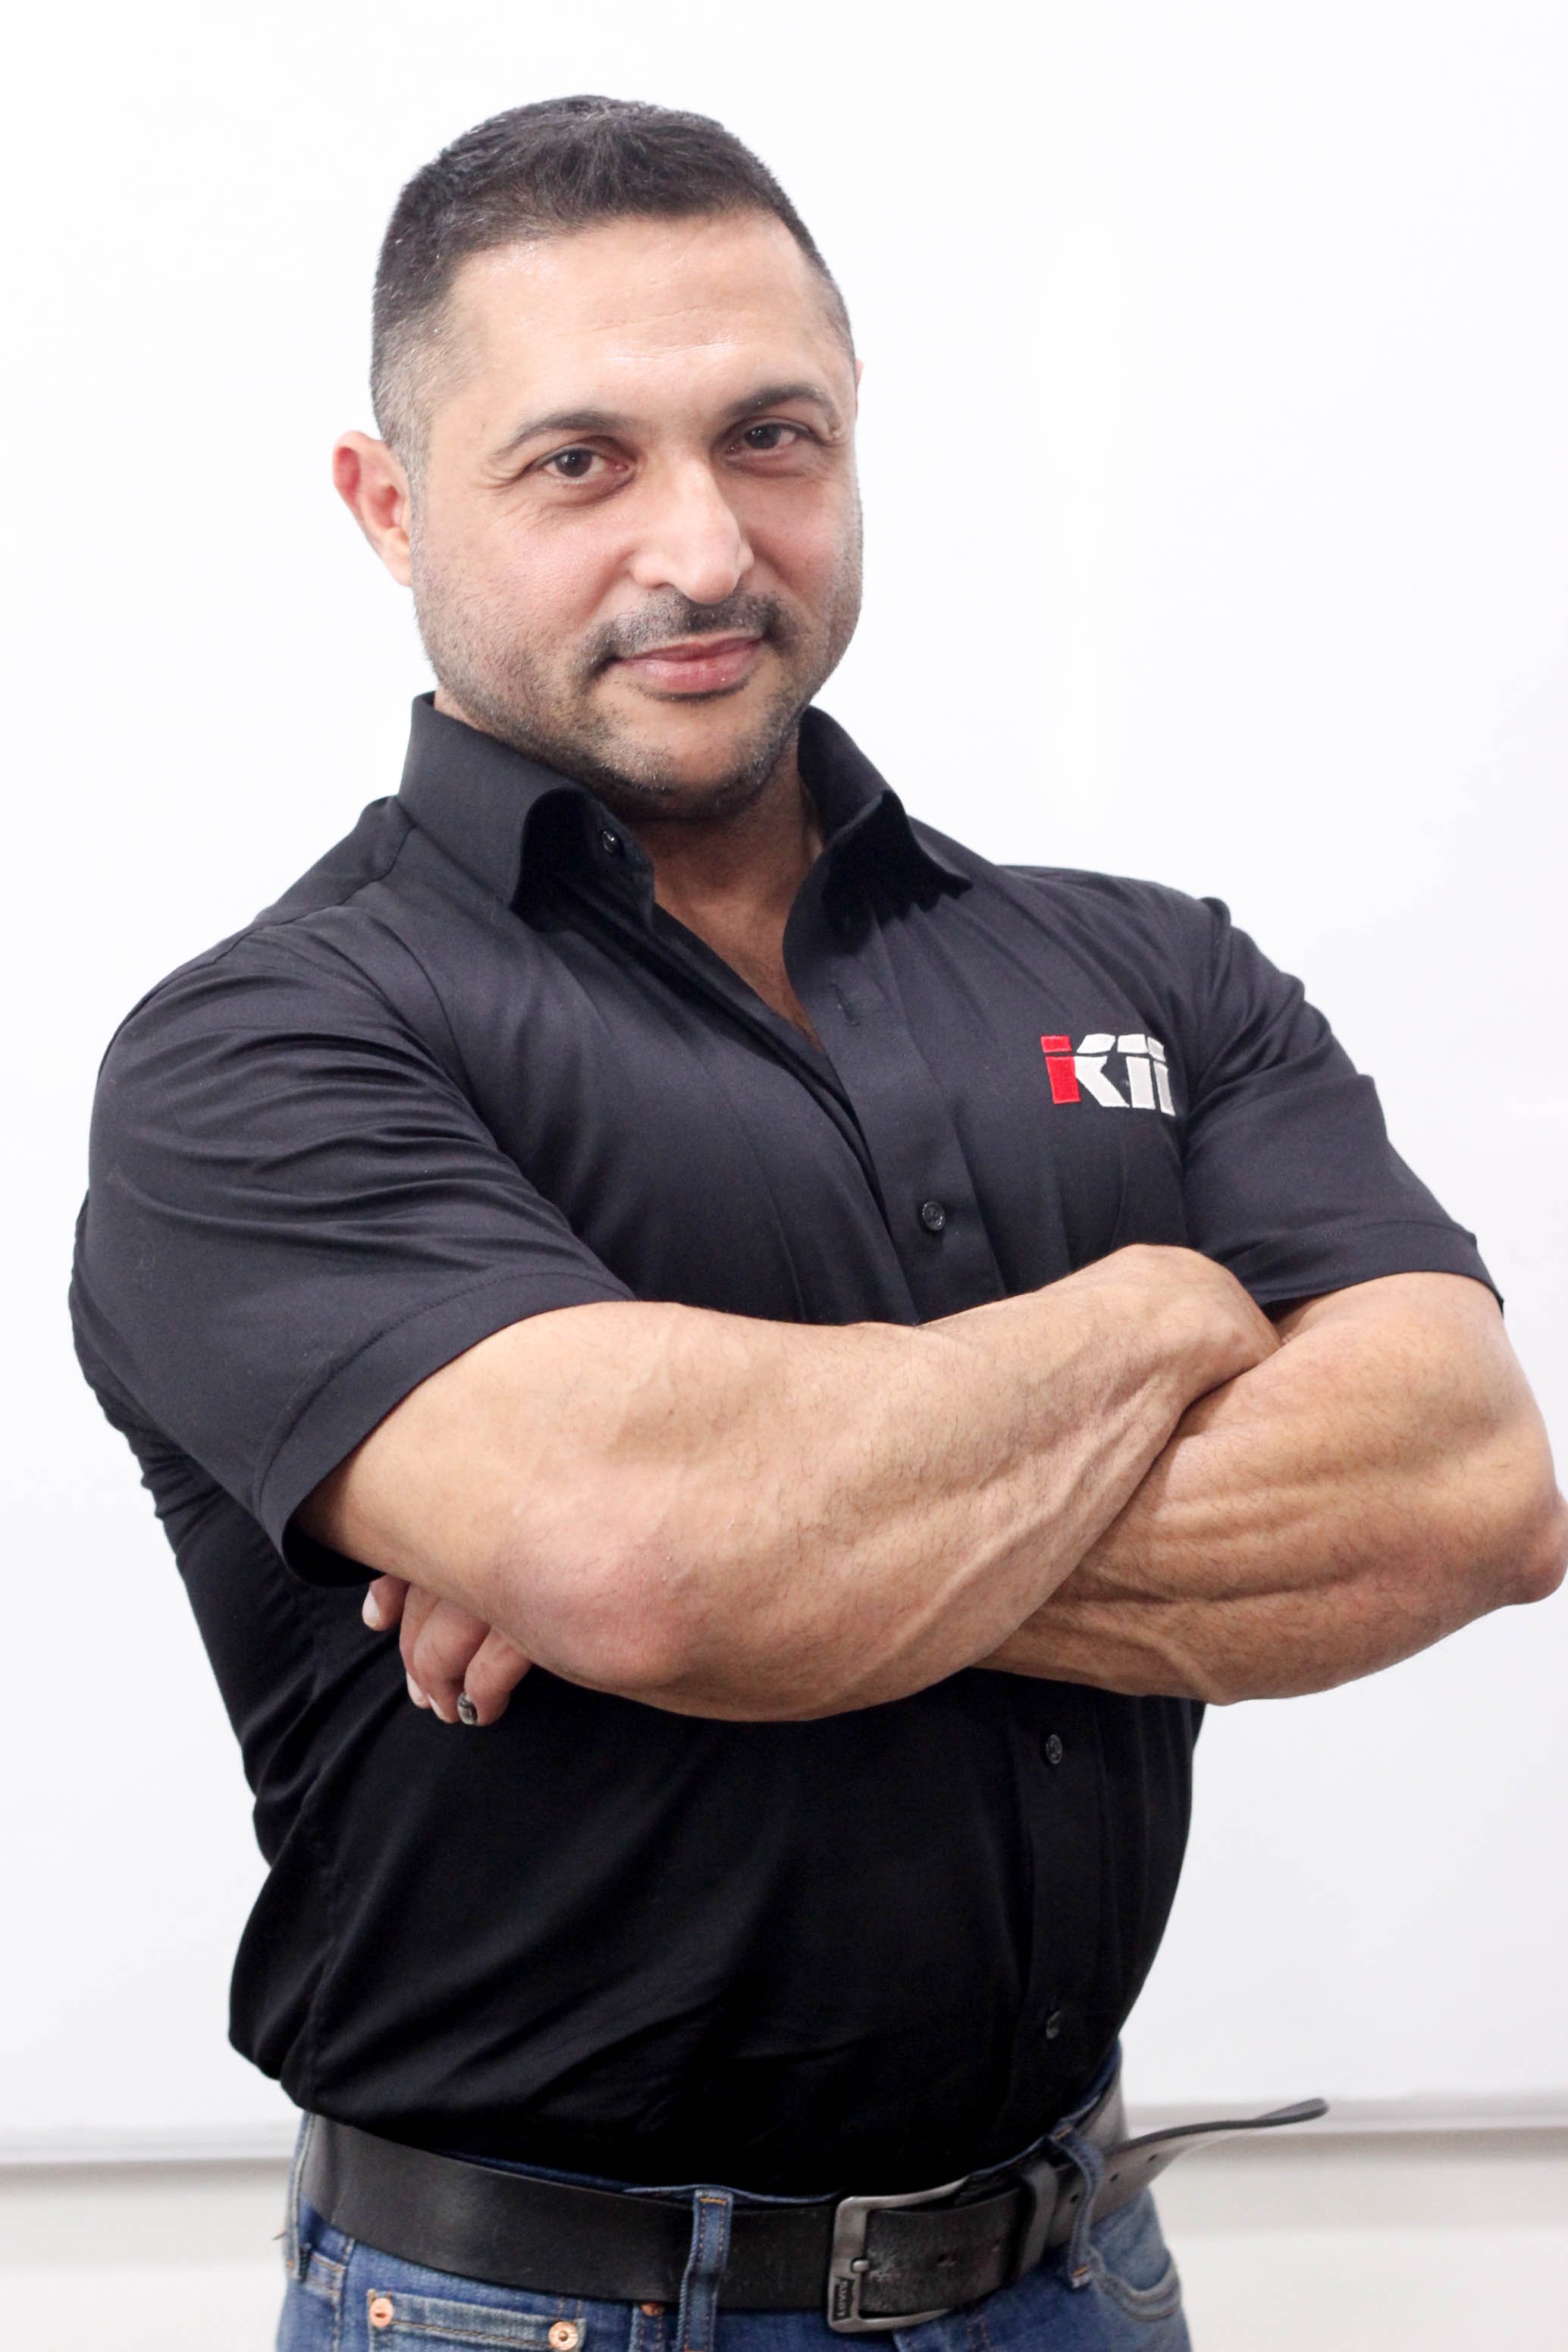 Co-Founder, Managing Director, K11 Education Pvt. Ltd.
Training Director - K11 Academy of Fitness Sciences.
Executive Director - Neulife Nutrition Systems